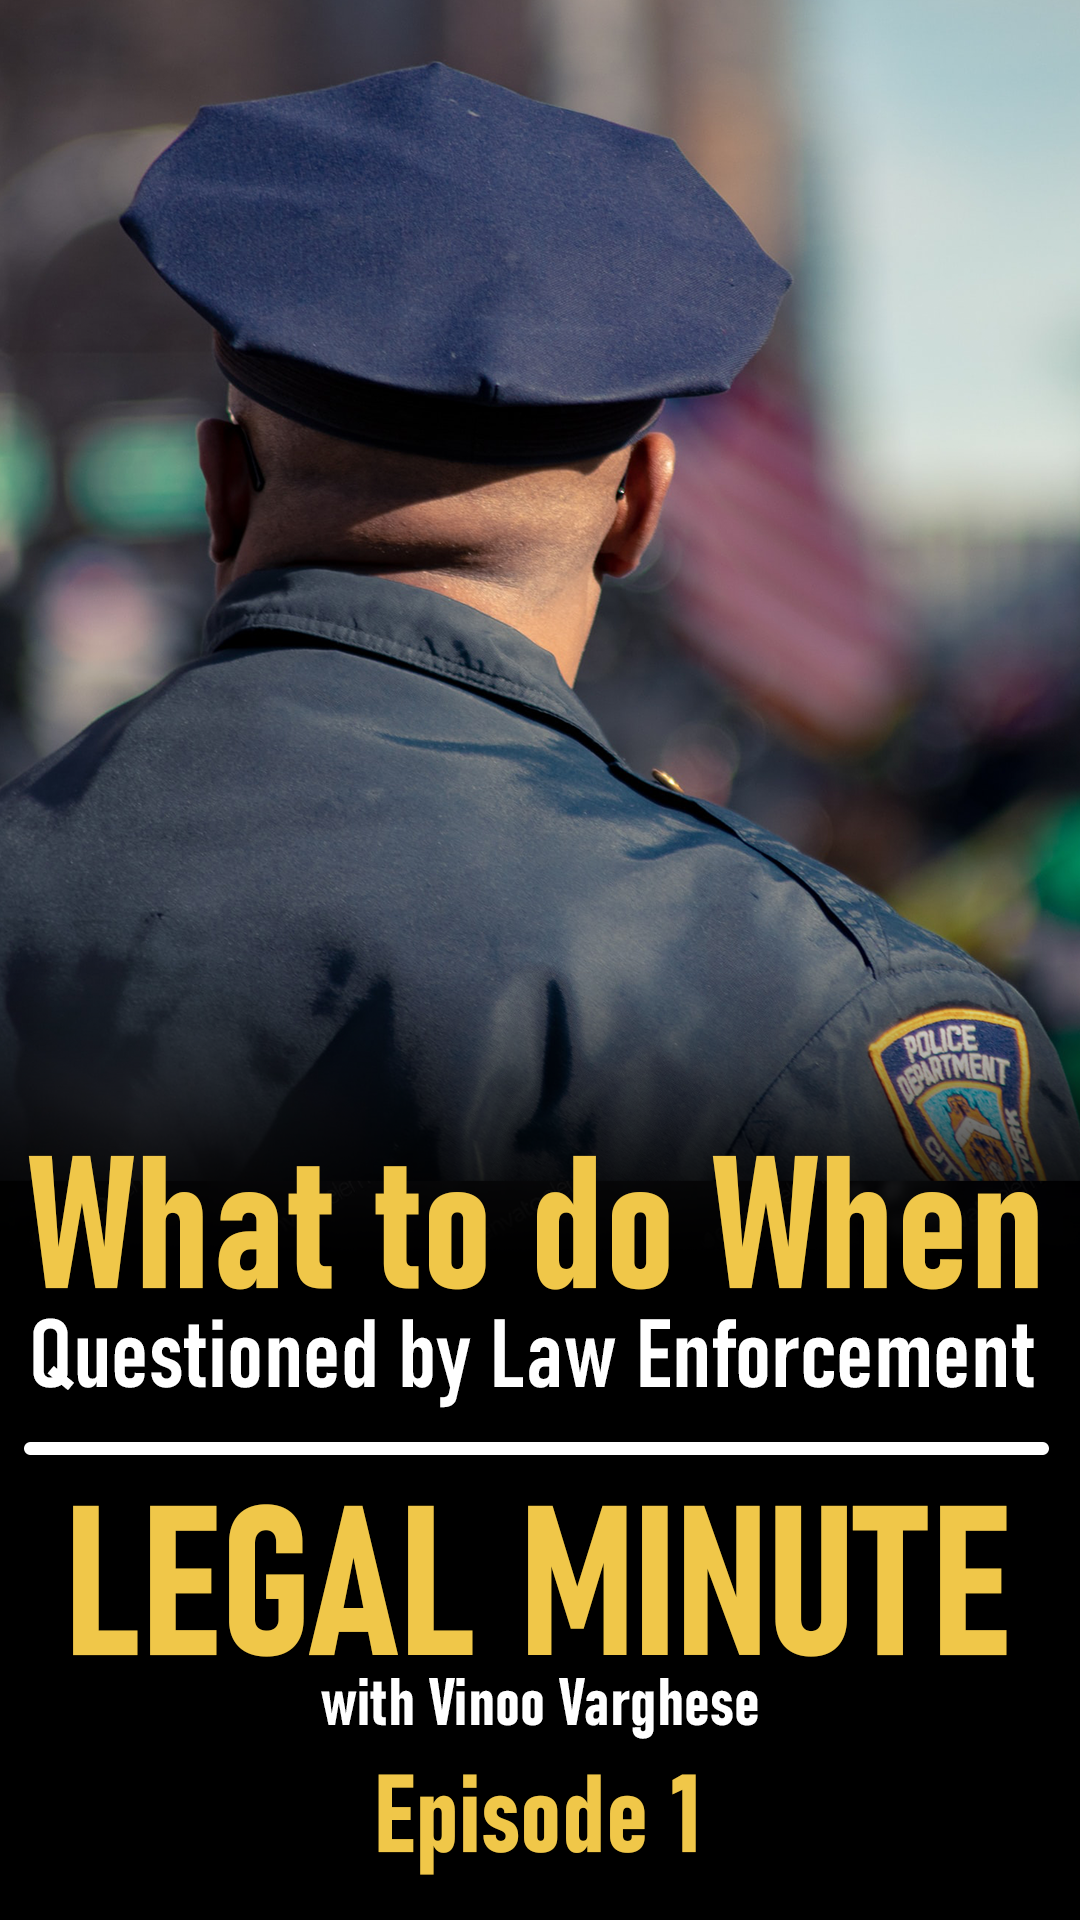 What to do when questioned by law enforcement